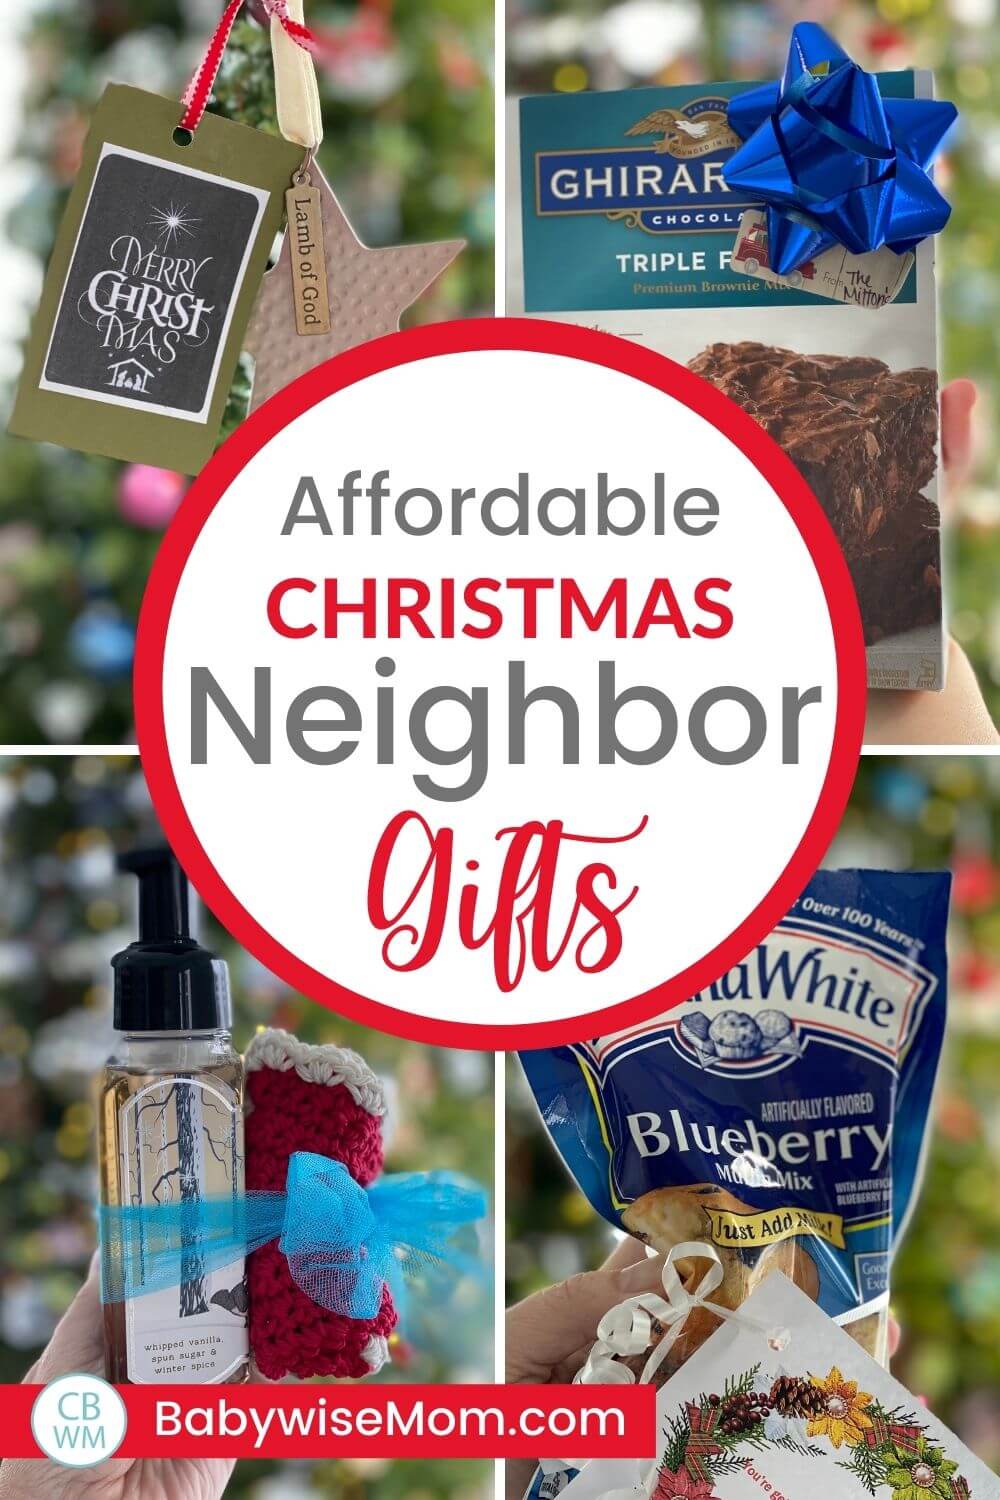 Thoughtful Gifts Ideas for Your Neighbors - Fabulessly Frugal